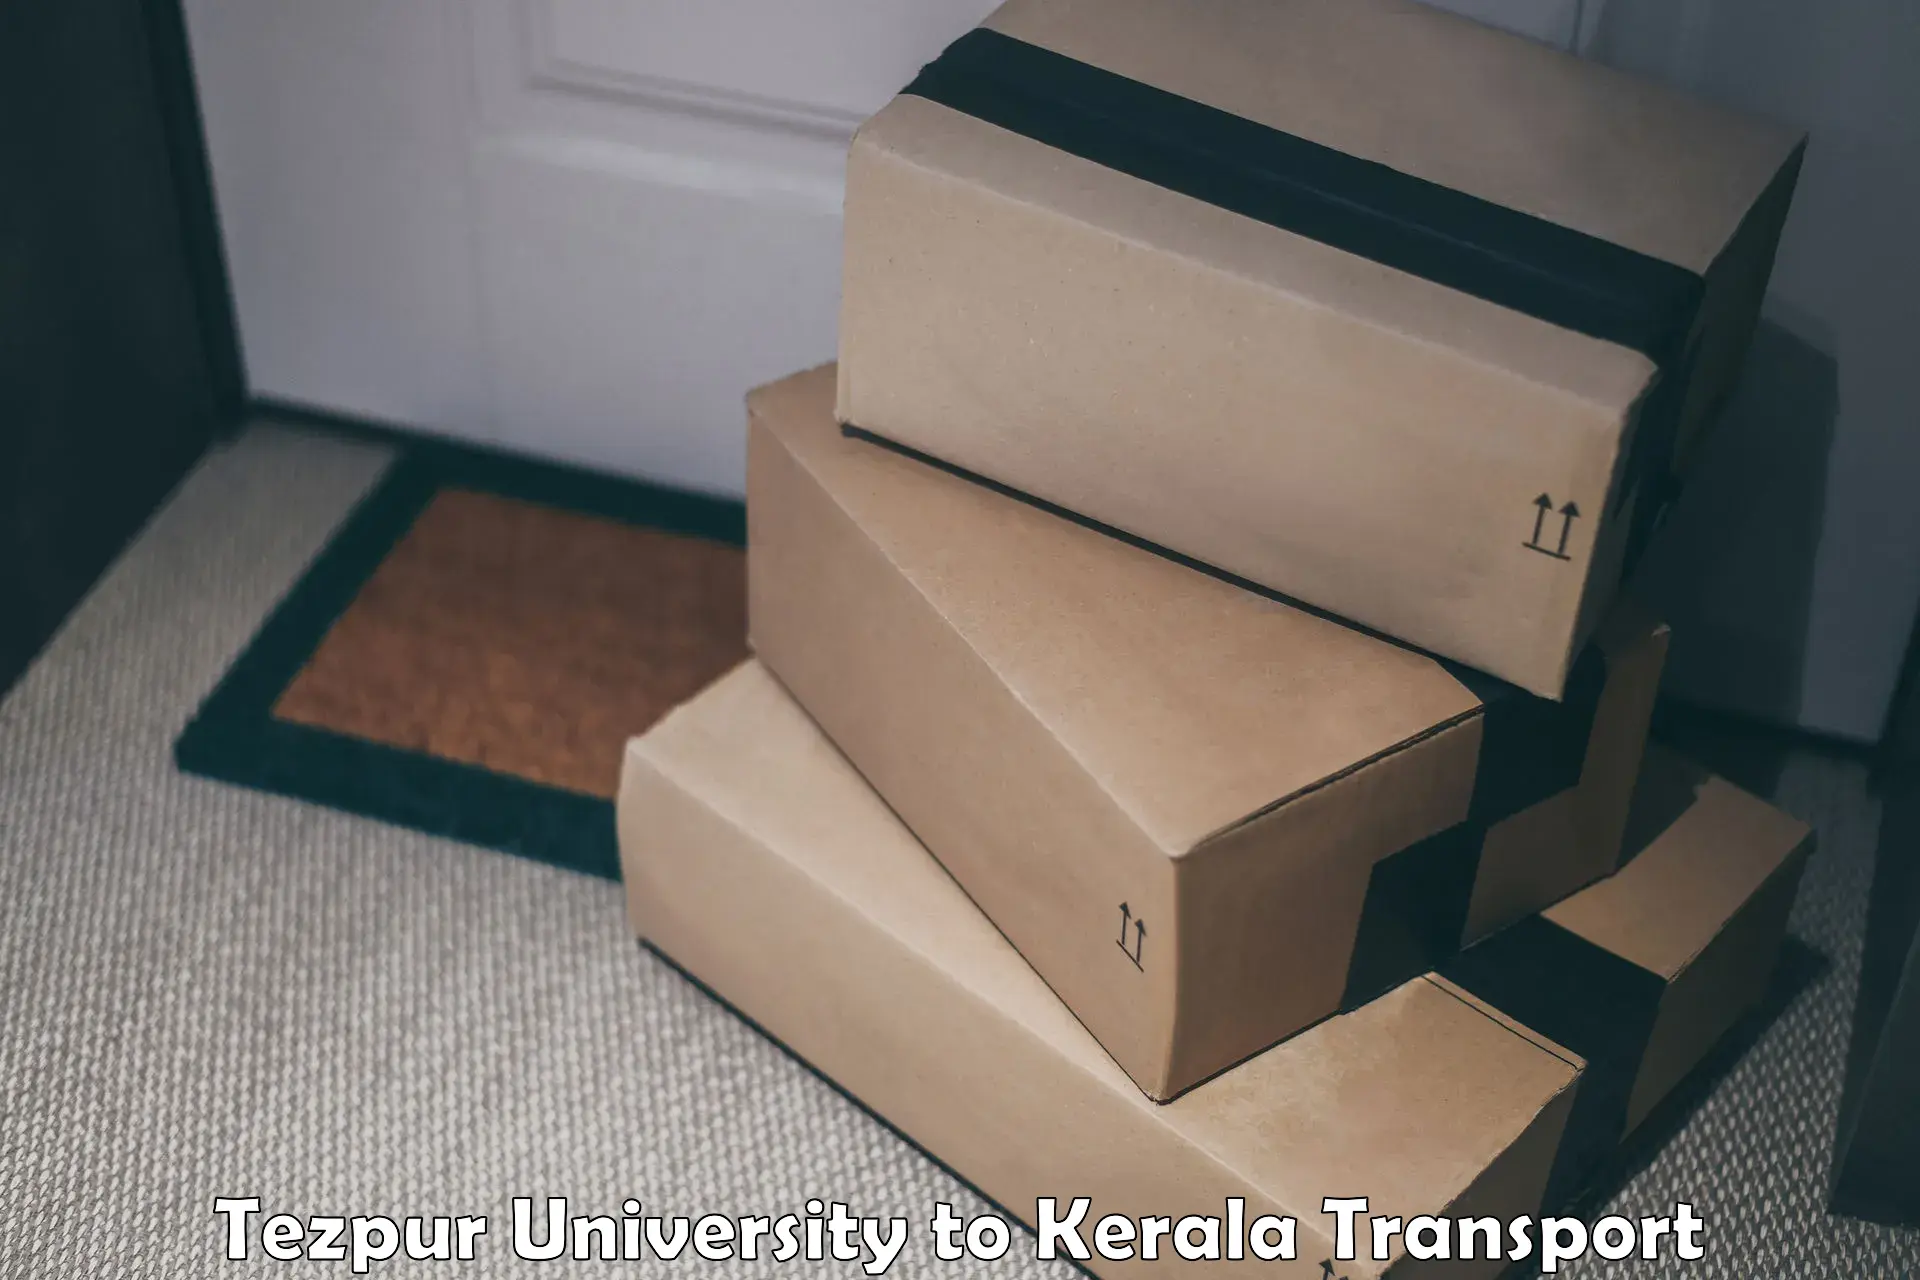 All India transport service Tezpur University to Cochin University of Science and Technology